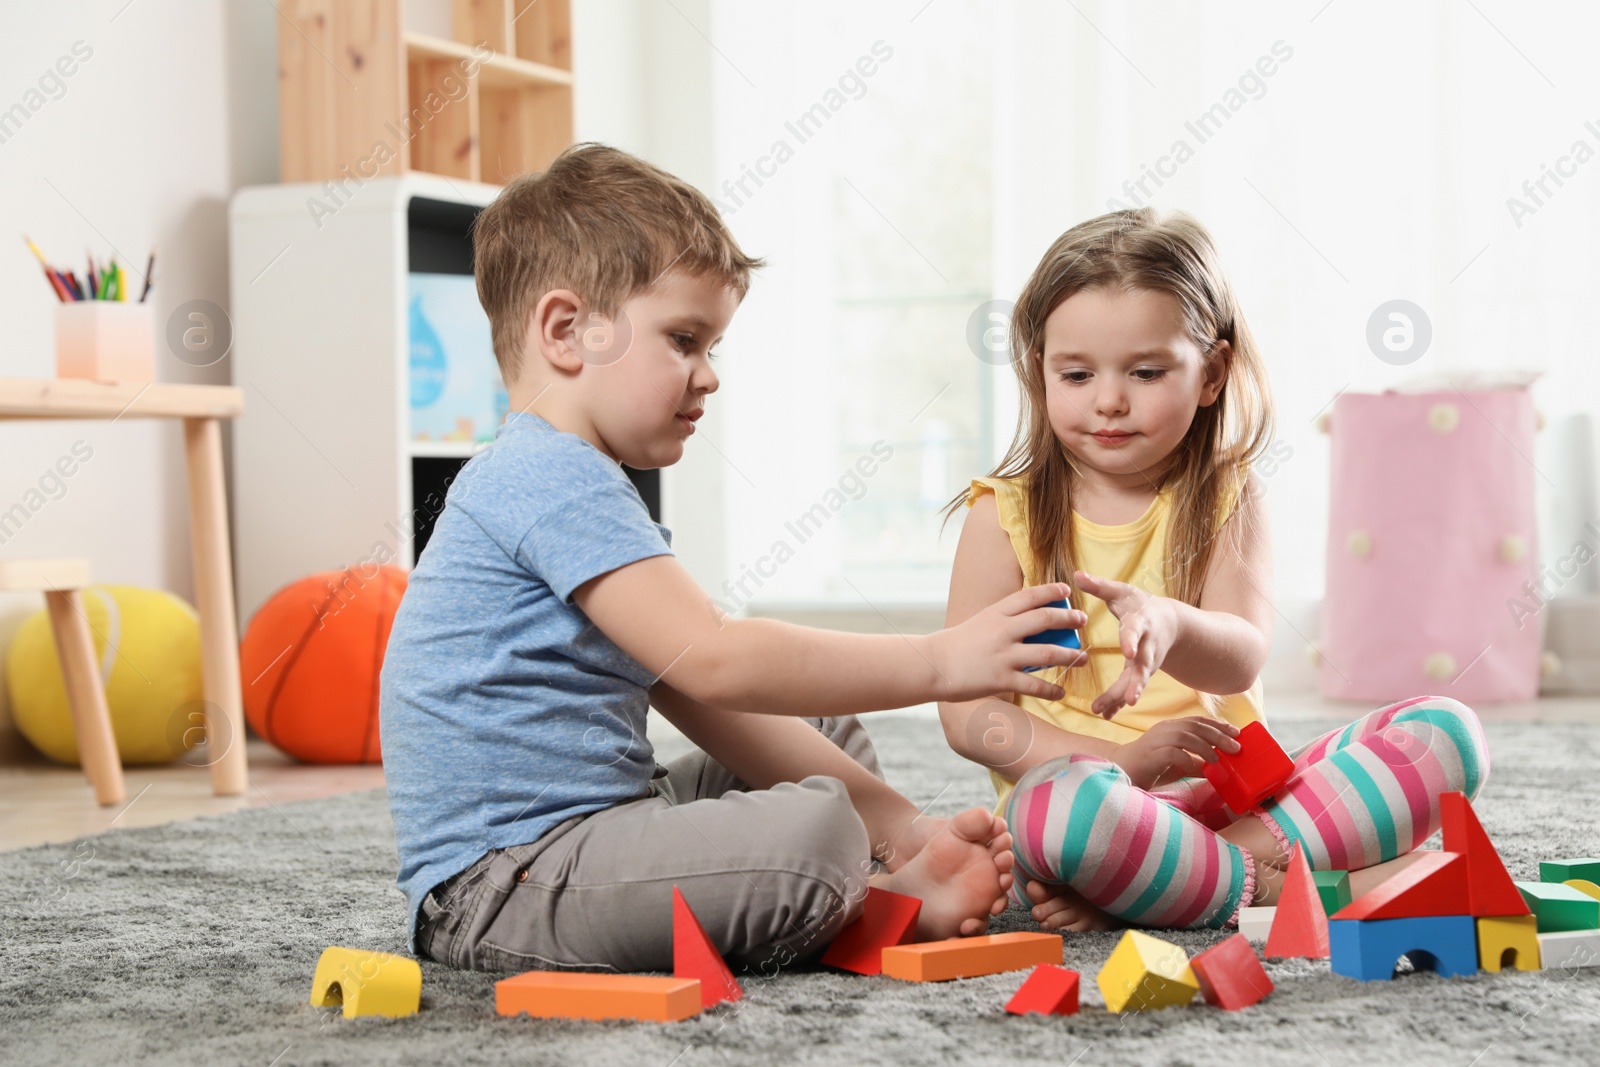 Photo of Little children playing with colorful blocks indoors